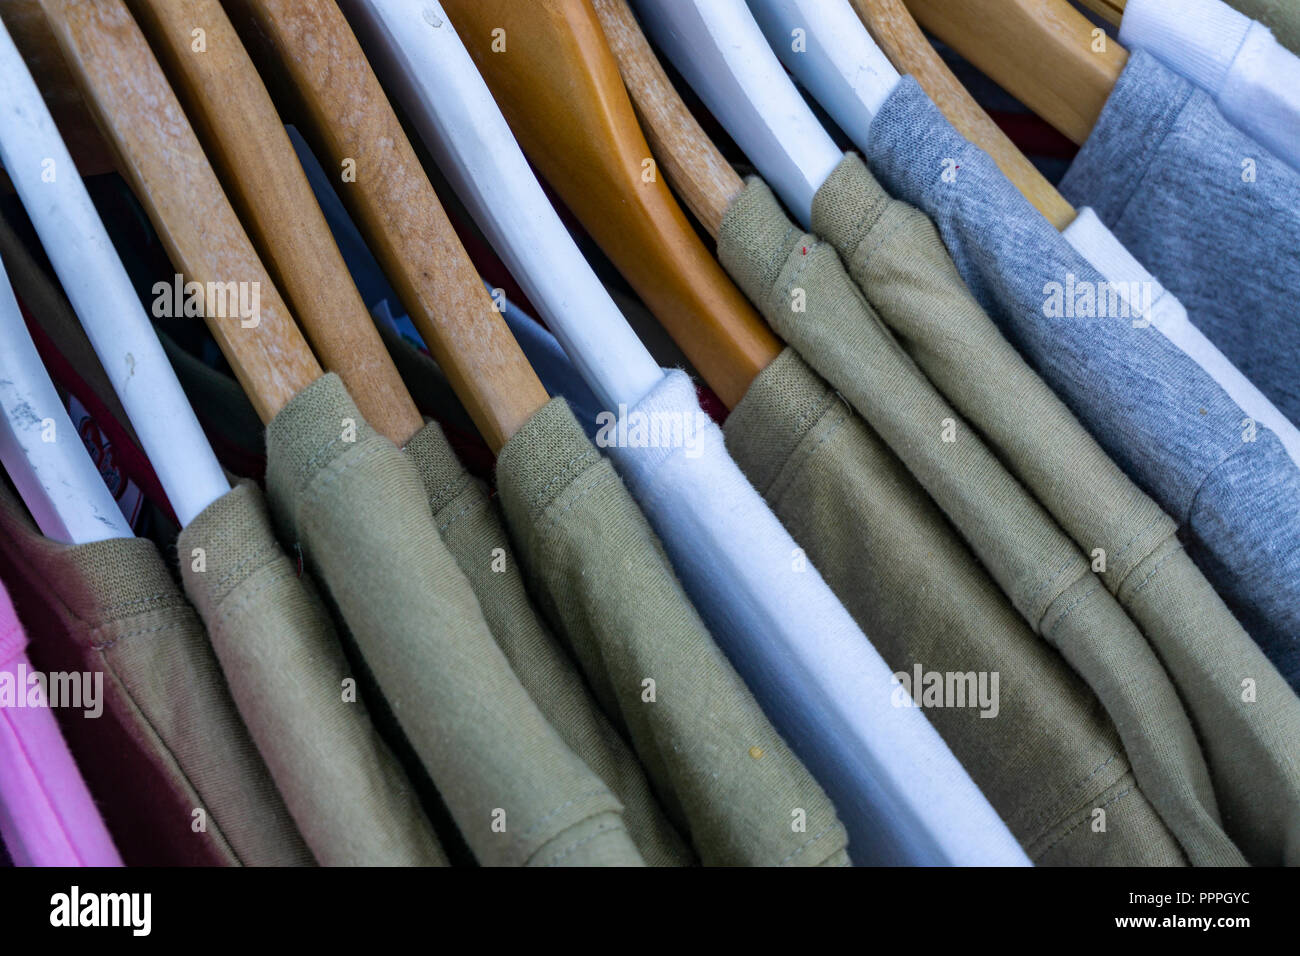 Berlin, Germany, August 31, 2018: Full Frame Close-Up of T-Shirts on Hangers Outside Fashion Shop Stock Photo